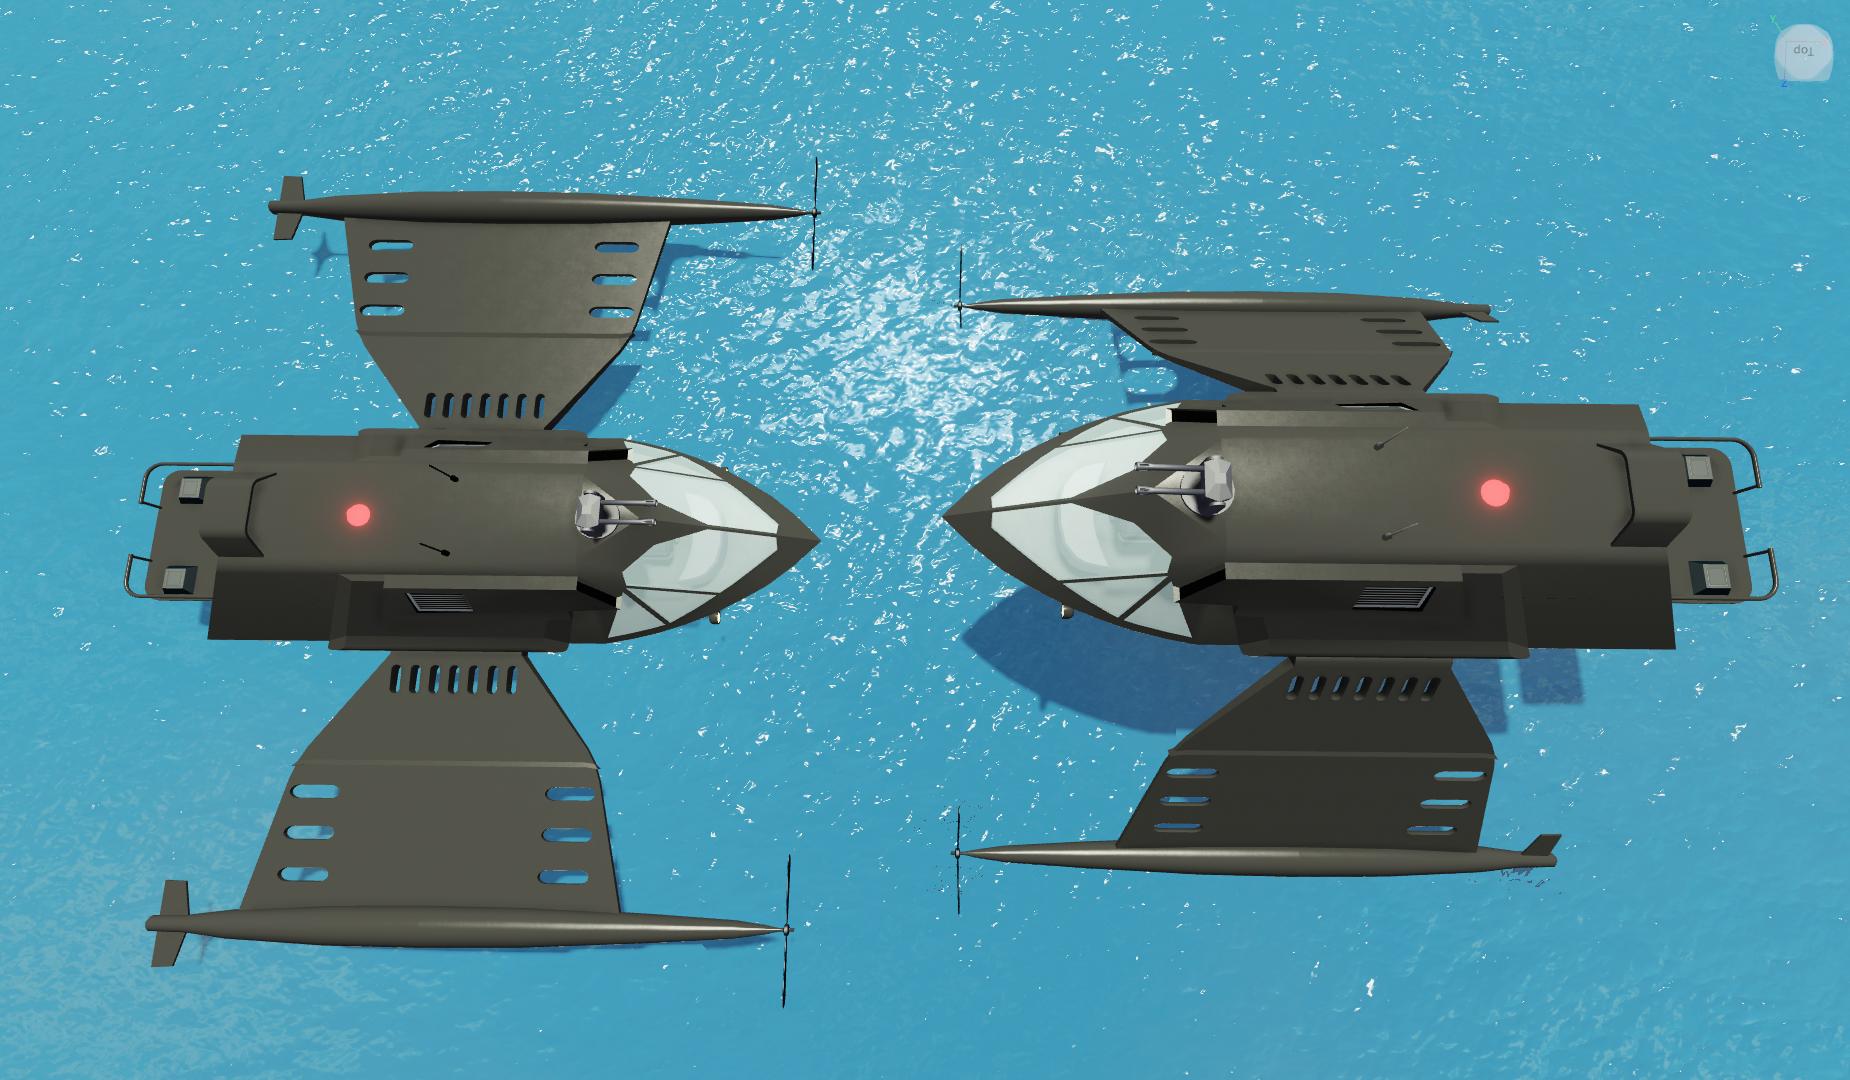 Simon On Twitter Here S A Sneak Peak Of The New Stealth Boat - new stealth boat in roblox sharkbite youtube